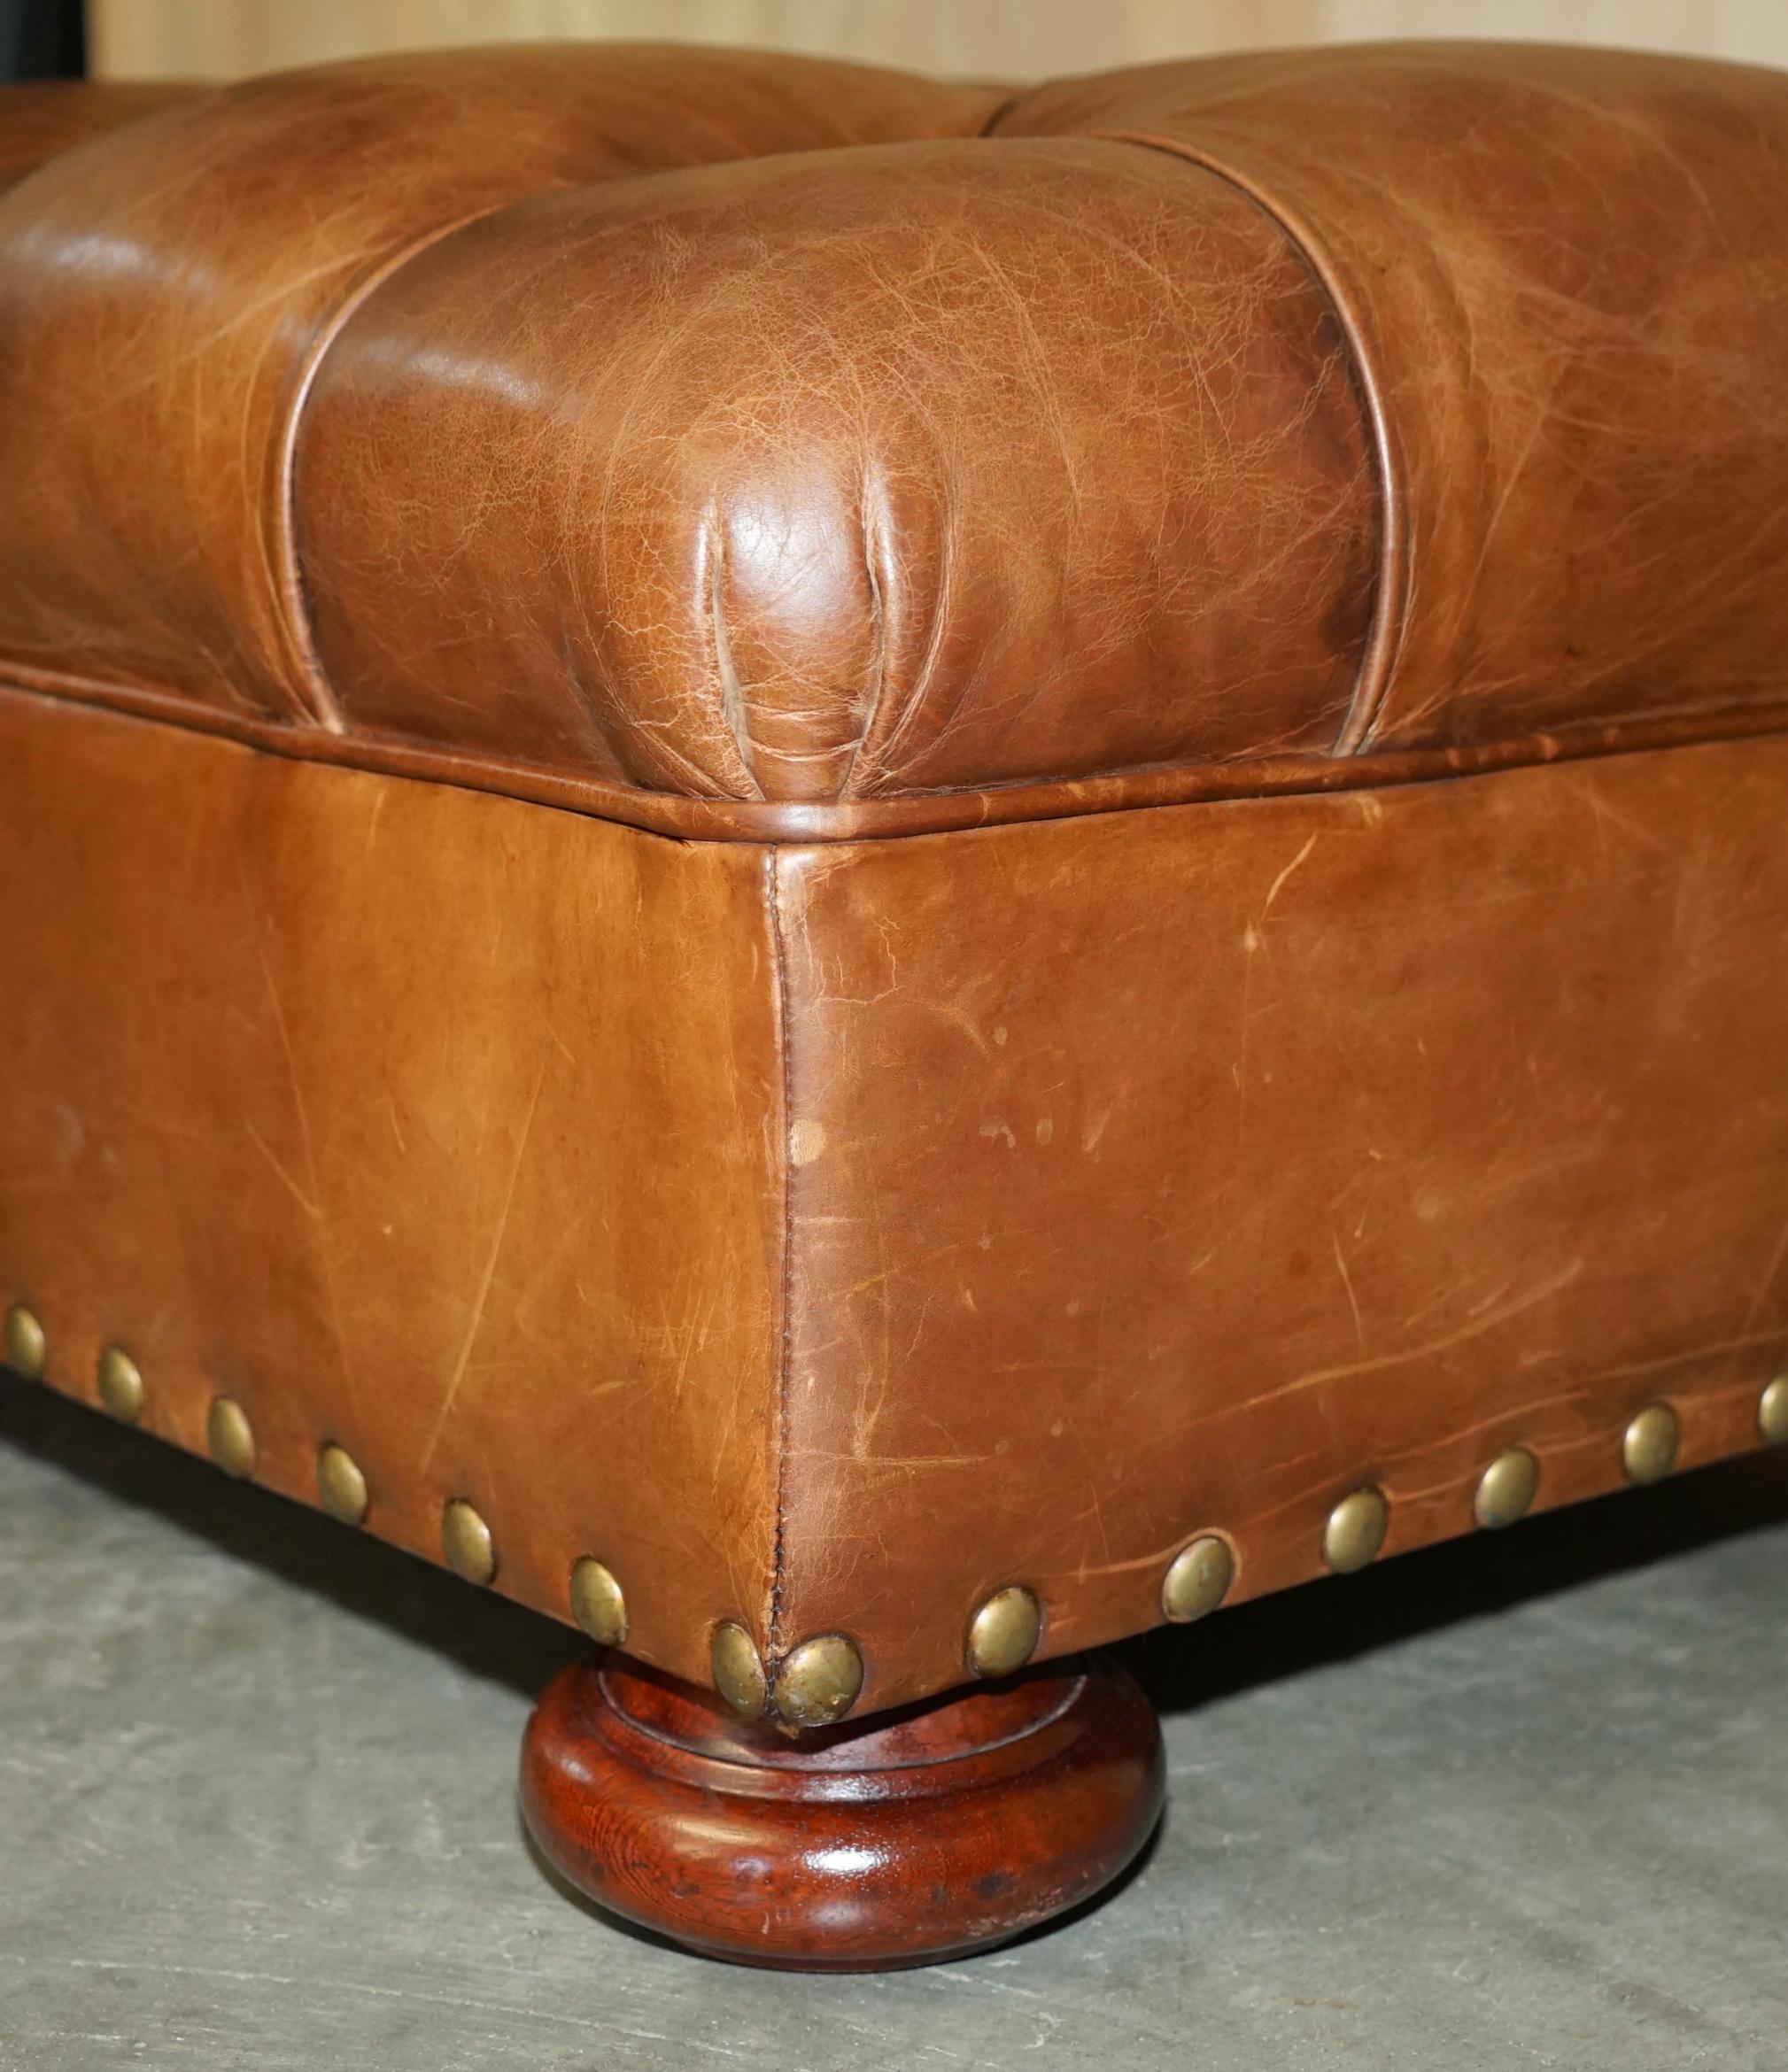 RALPH LAUREN WRITER'S CHESTERFIELD FOOTSTOOL OTTOMAN IN HERiTAGE BROWN LEATHER For Sale 2